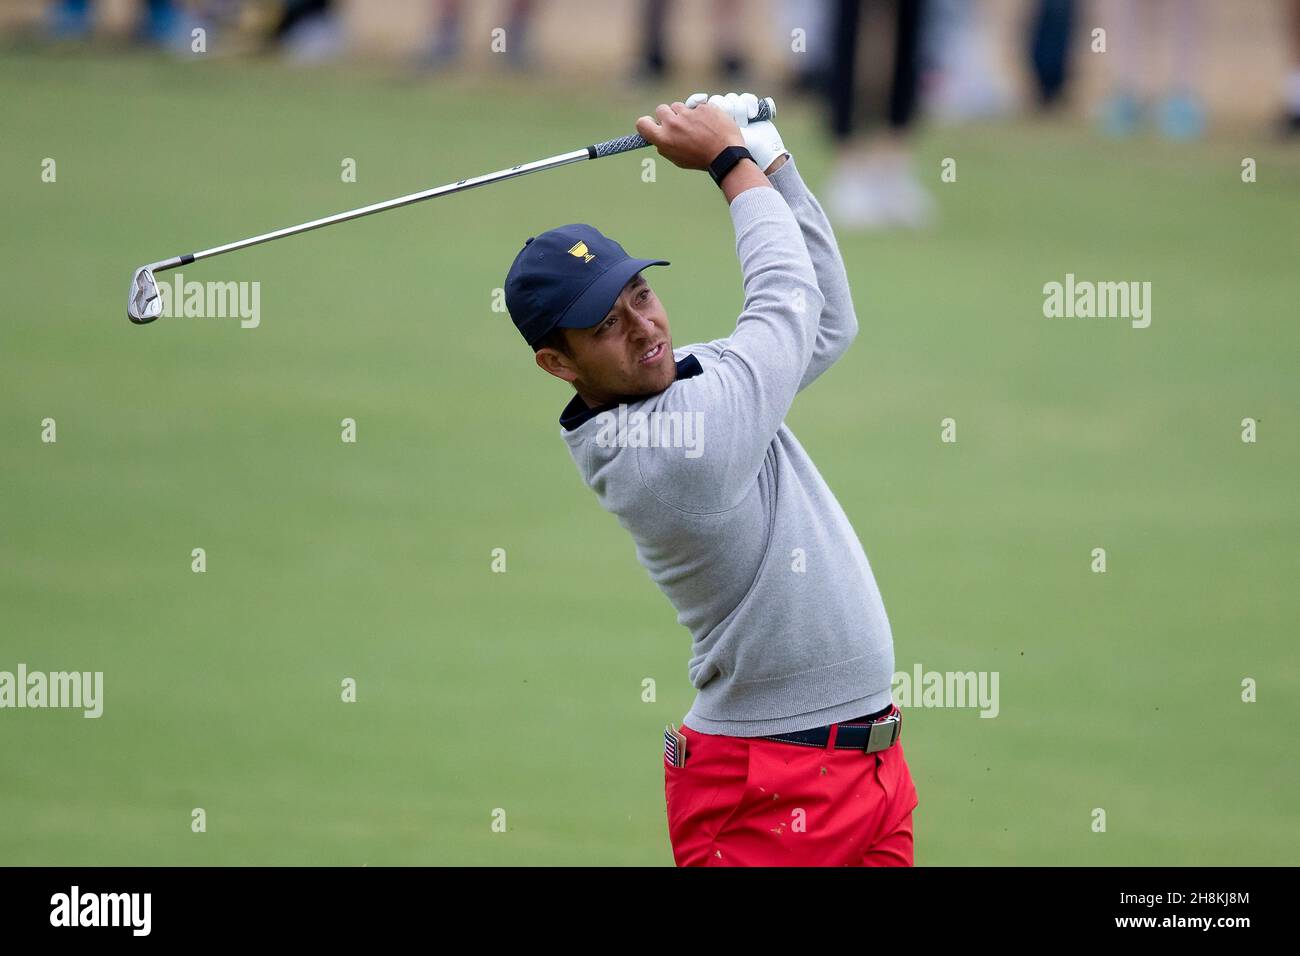 Xander Schauffele of team USA hits his approach shot on the 4th hole during round 3 of The Presidents Cup Credit Speed Media/Alamy Live News Stock Photo